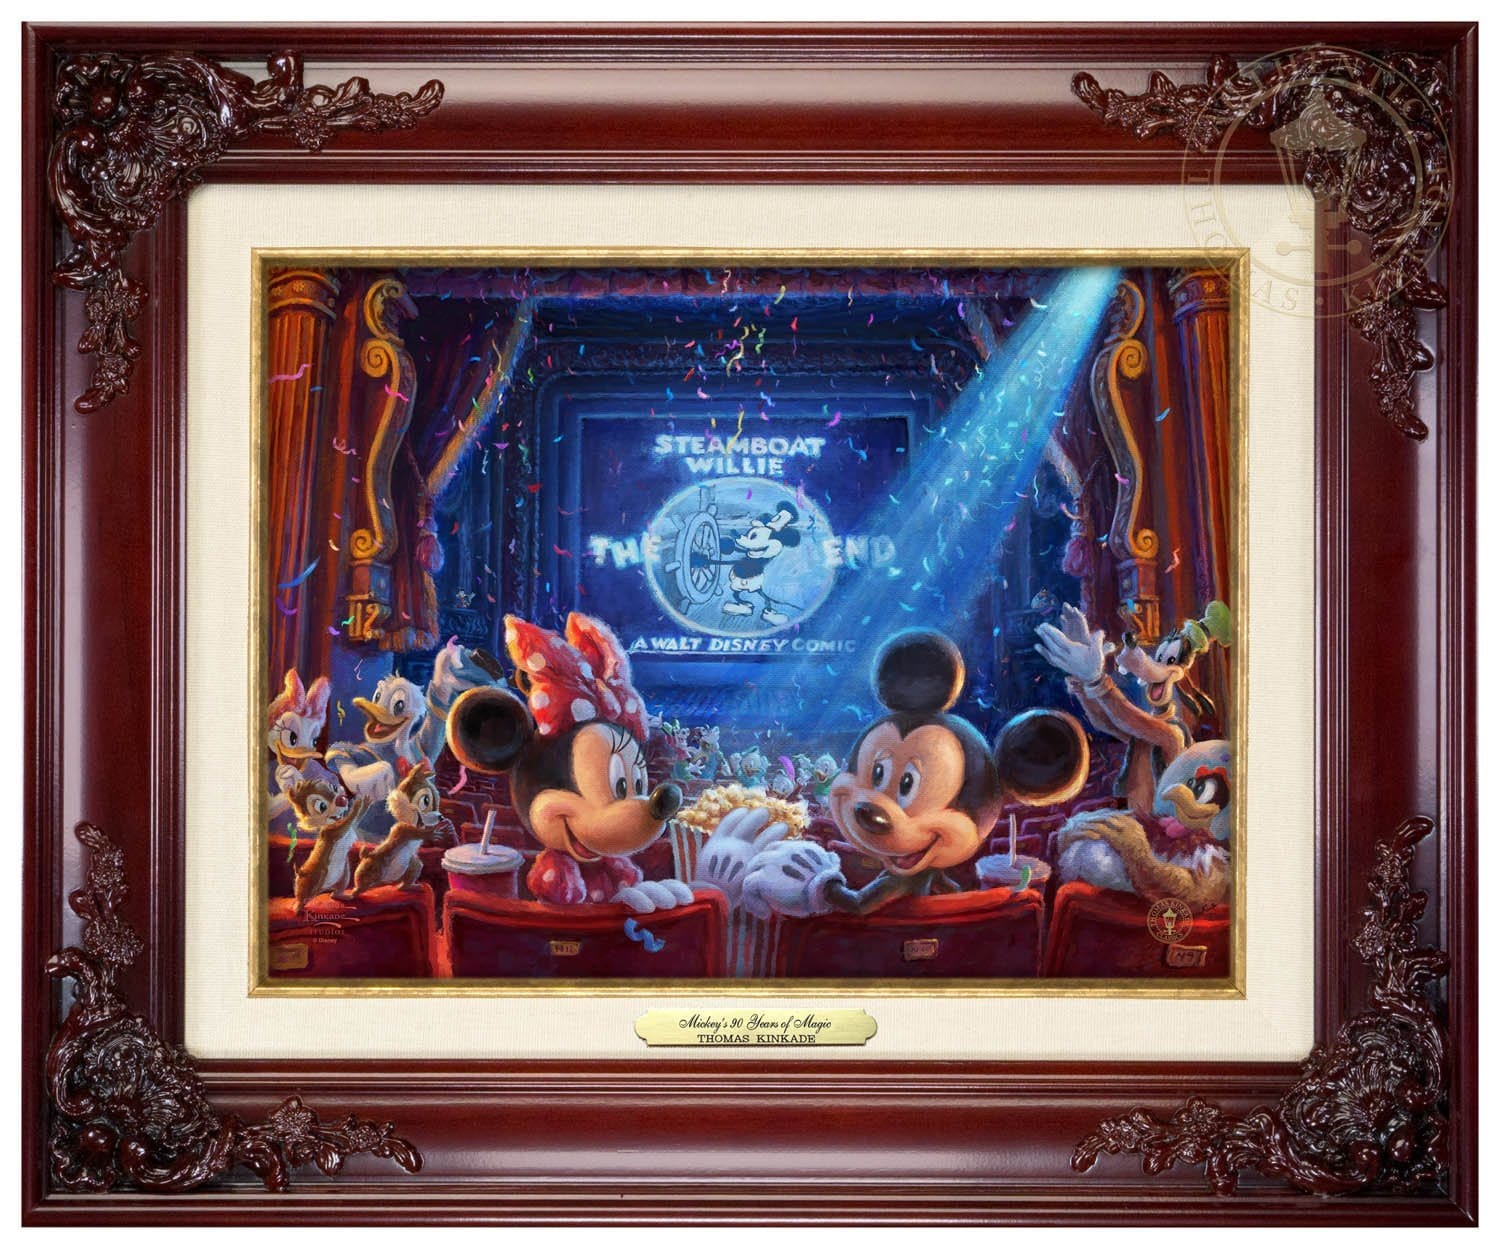 Minnie Mouse, Mickey Mouse’s original co-star from Steamboat Willie, has invited some of their most treasured friends to celebrate the film’s 90th anniversary - Brandy Frame.